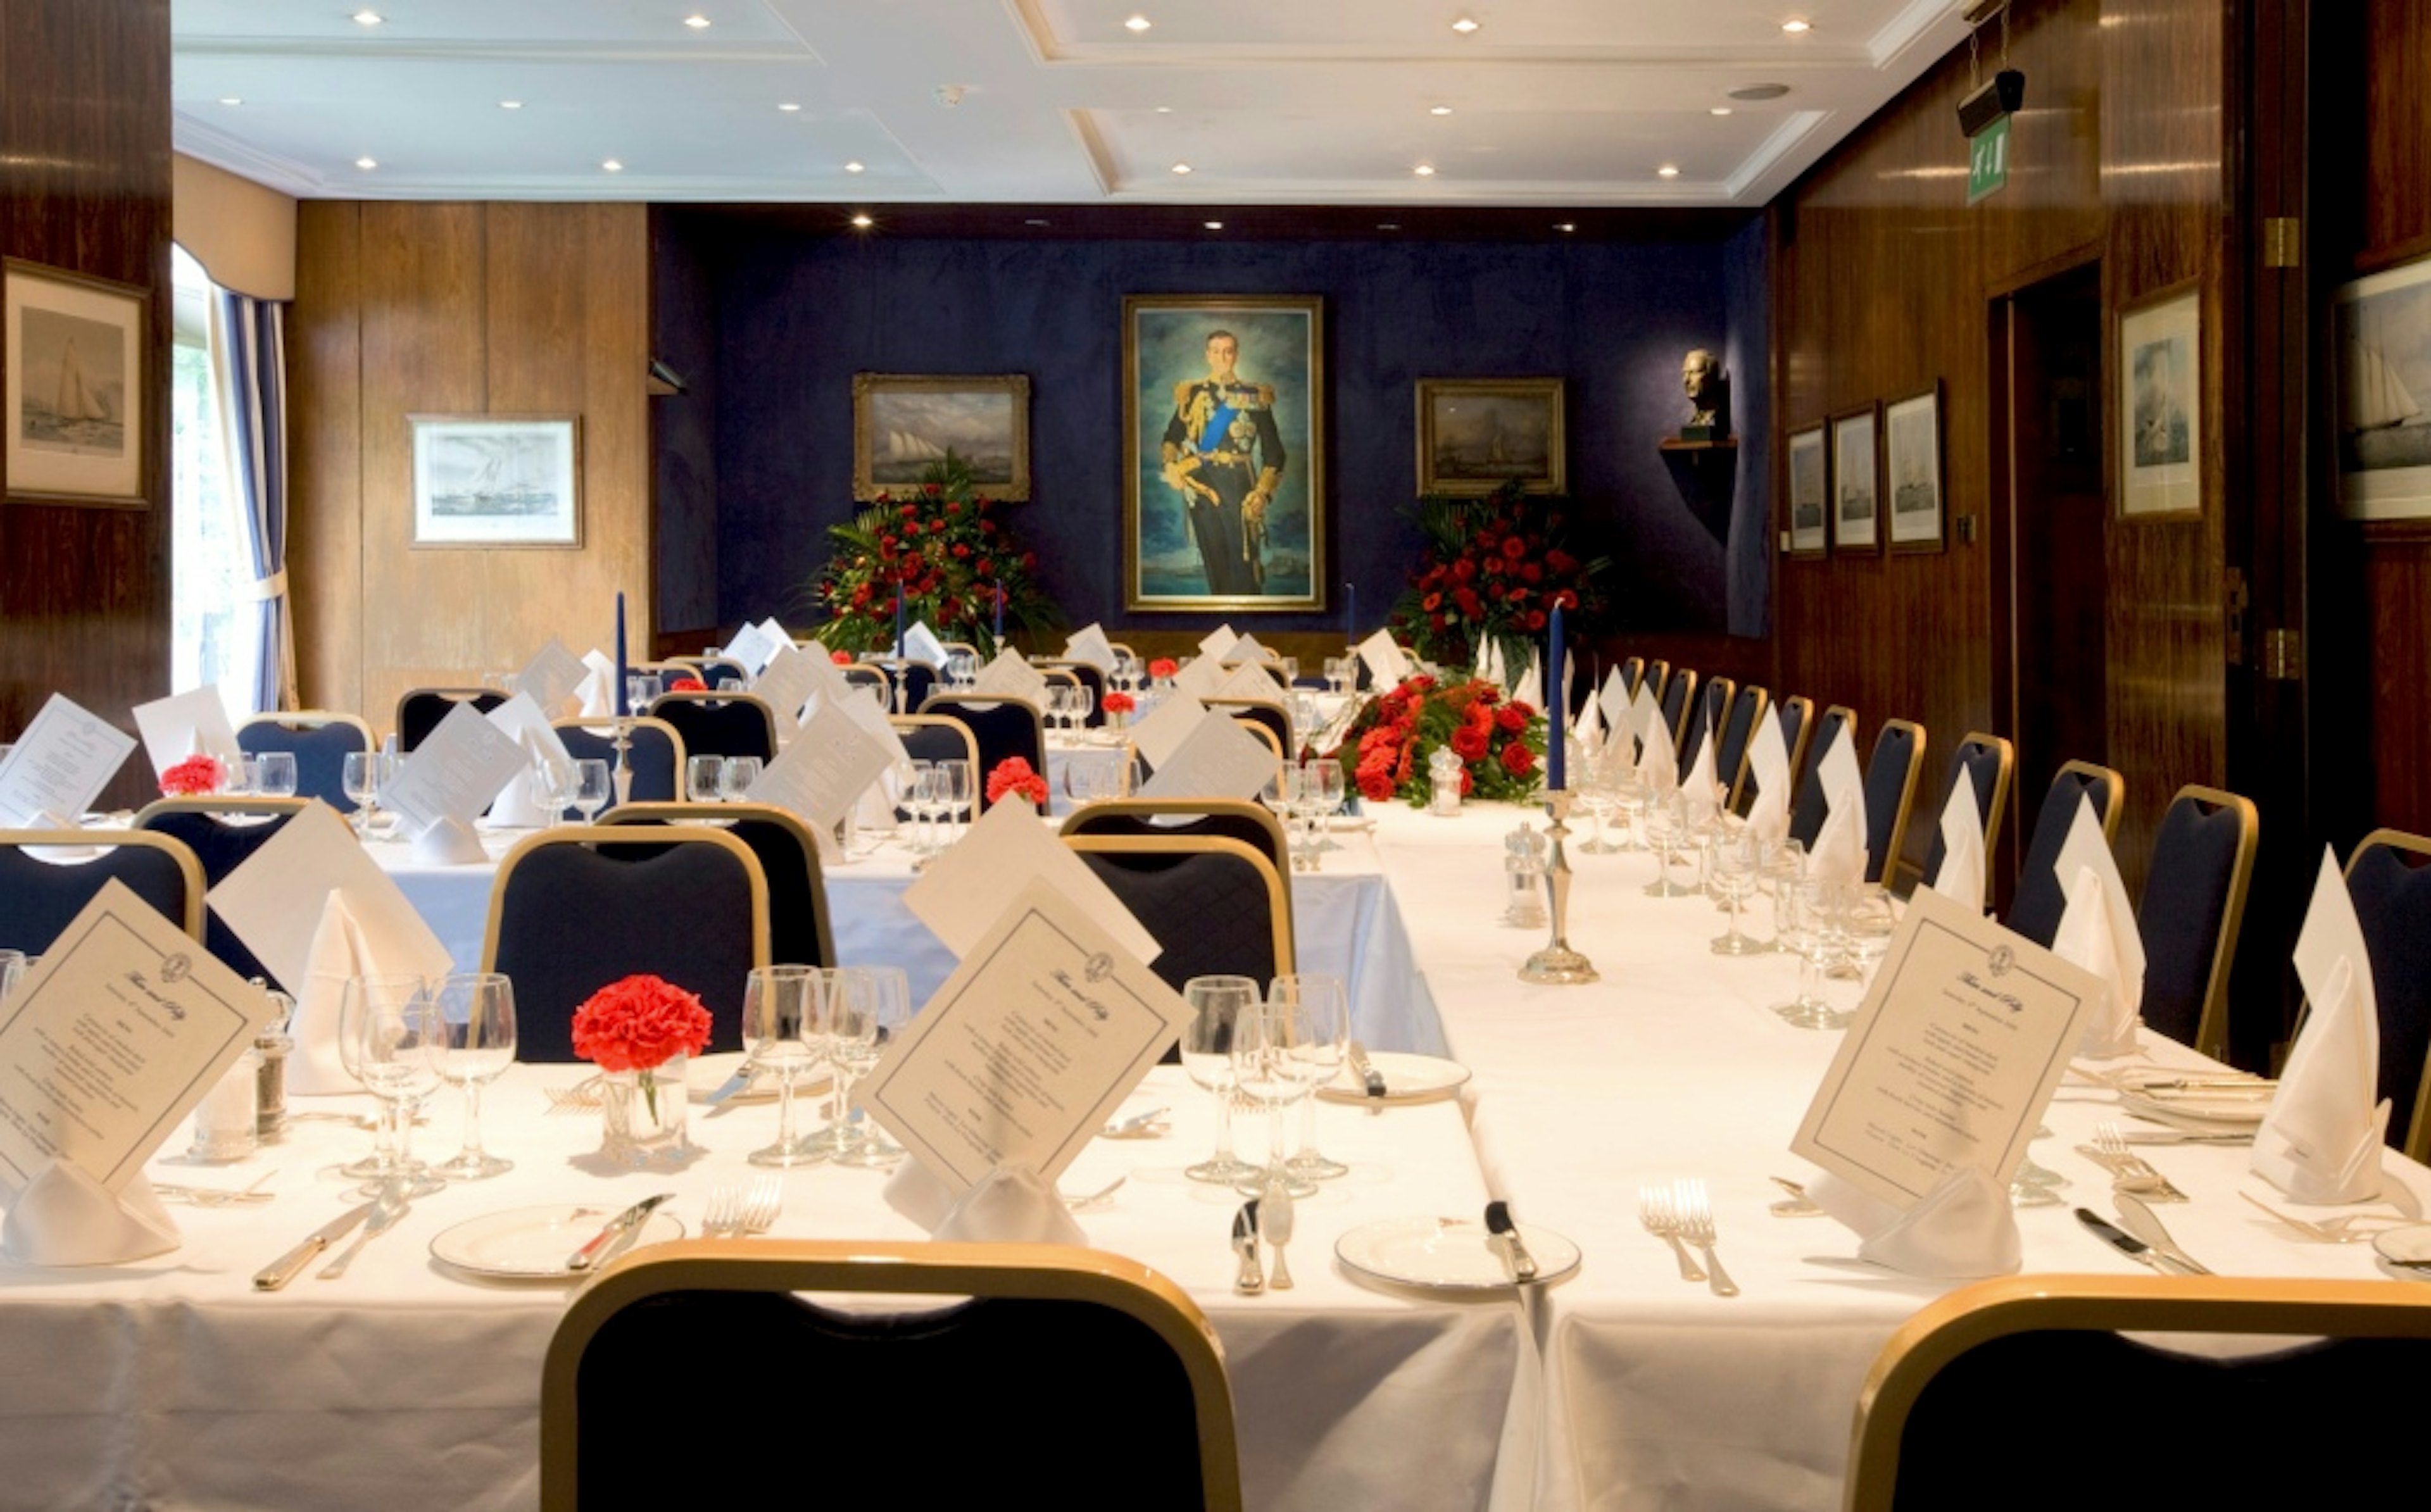 Small Private Dining Rooms - The Royal Thames Yacht Club  - Dining  in The Coffee Room  - Banner